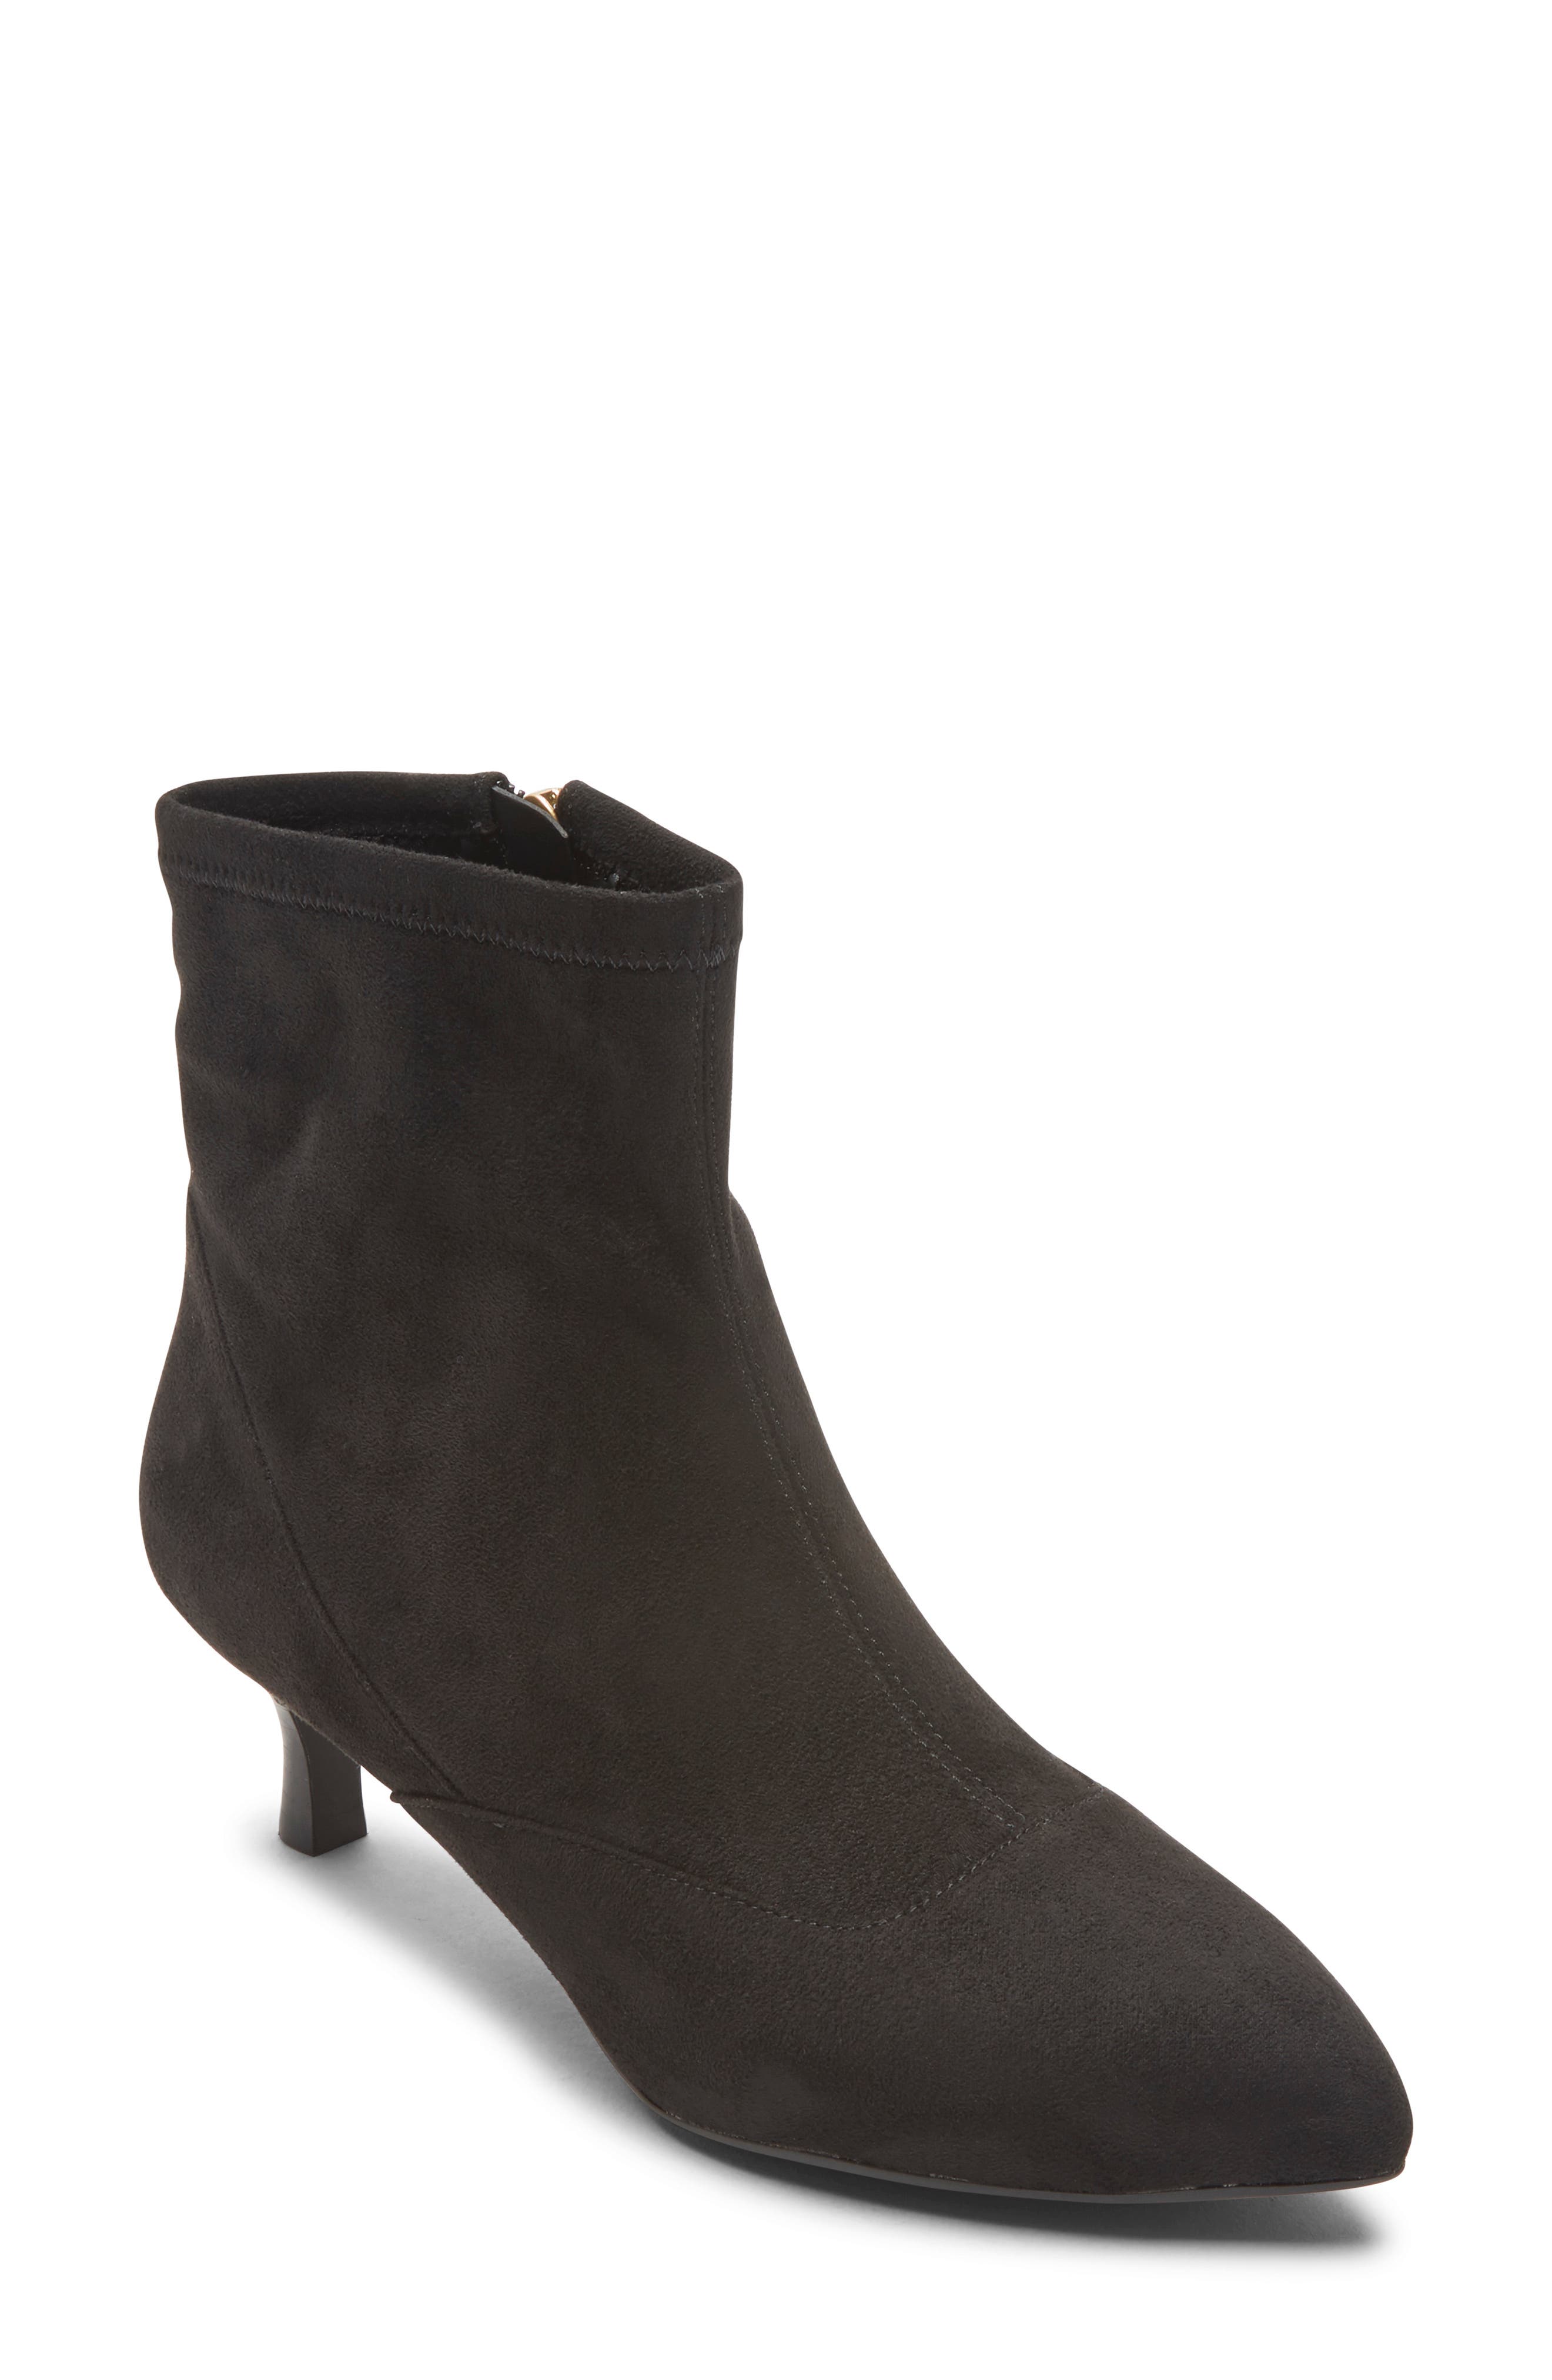 rockport total motion bootie